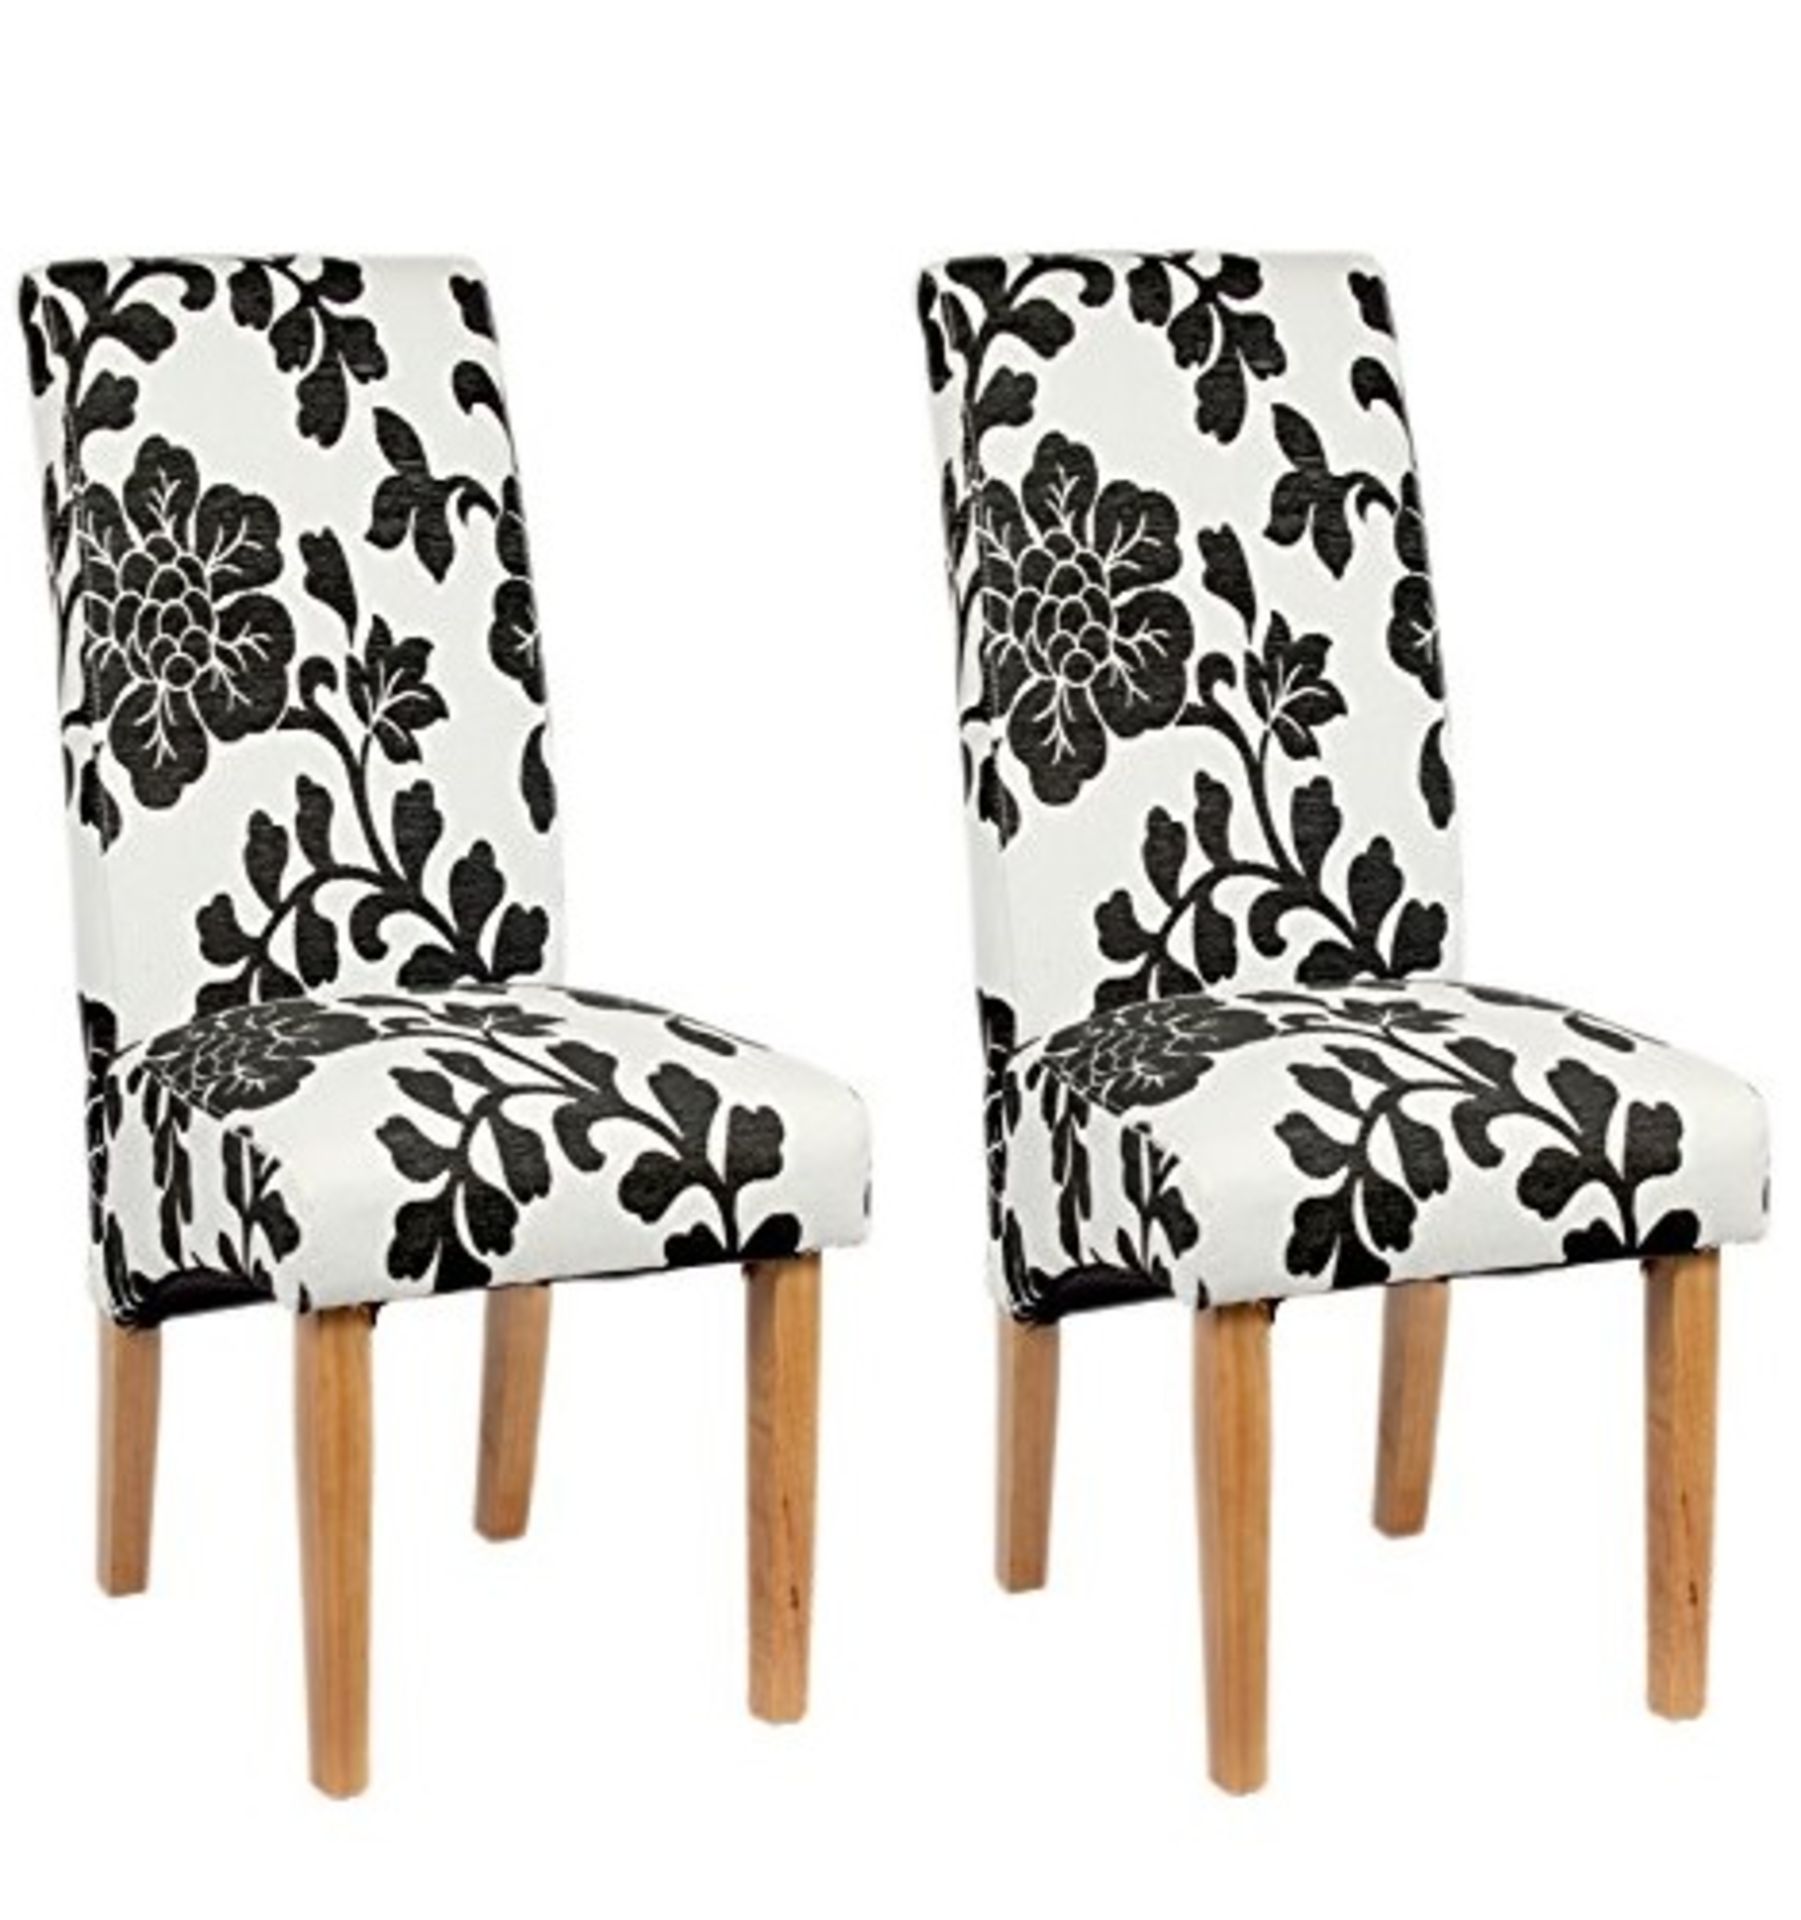 V Brand New Black Flower Fabric Dining Chair H105 x W 45 x D64 cms X 2 YOUR BID PRICE TO BE